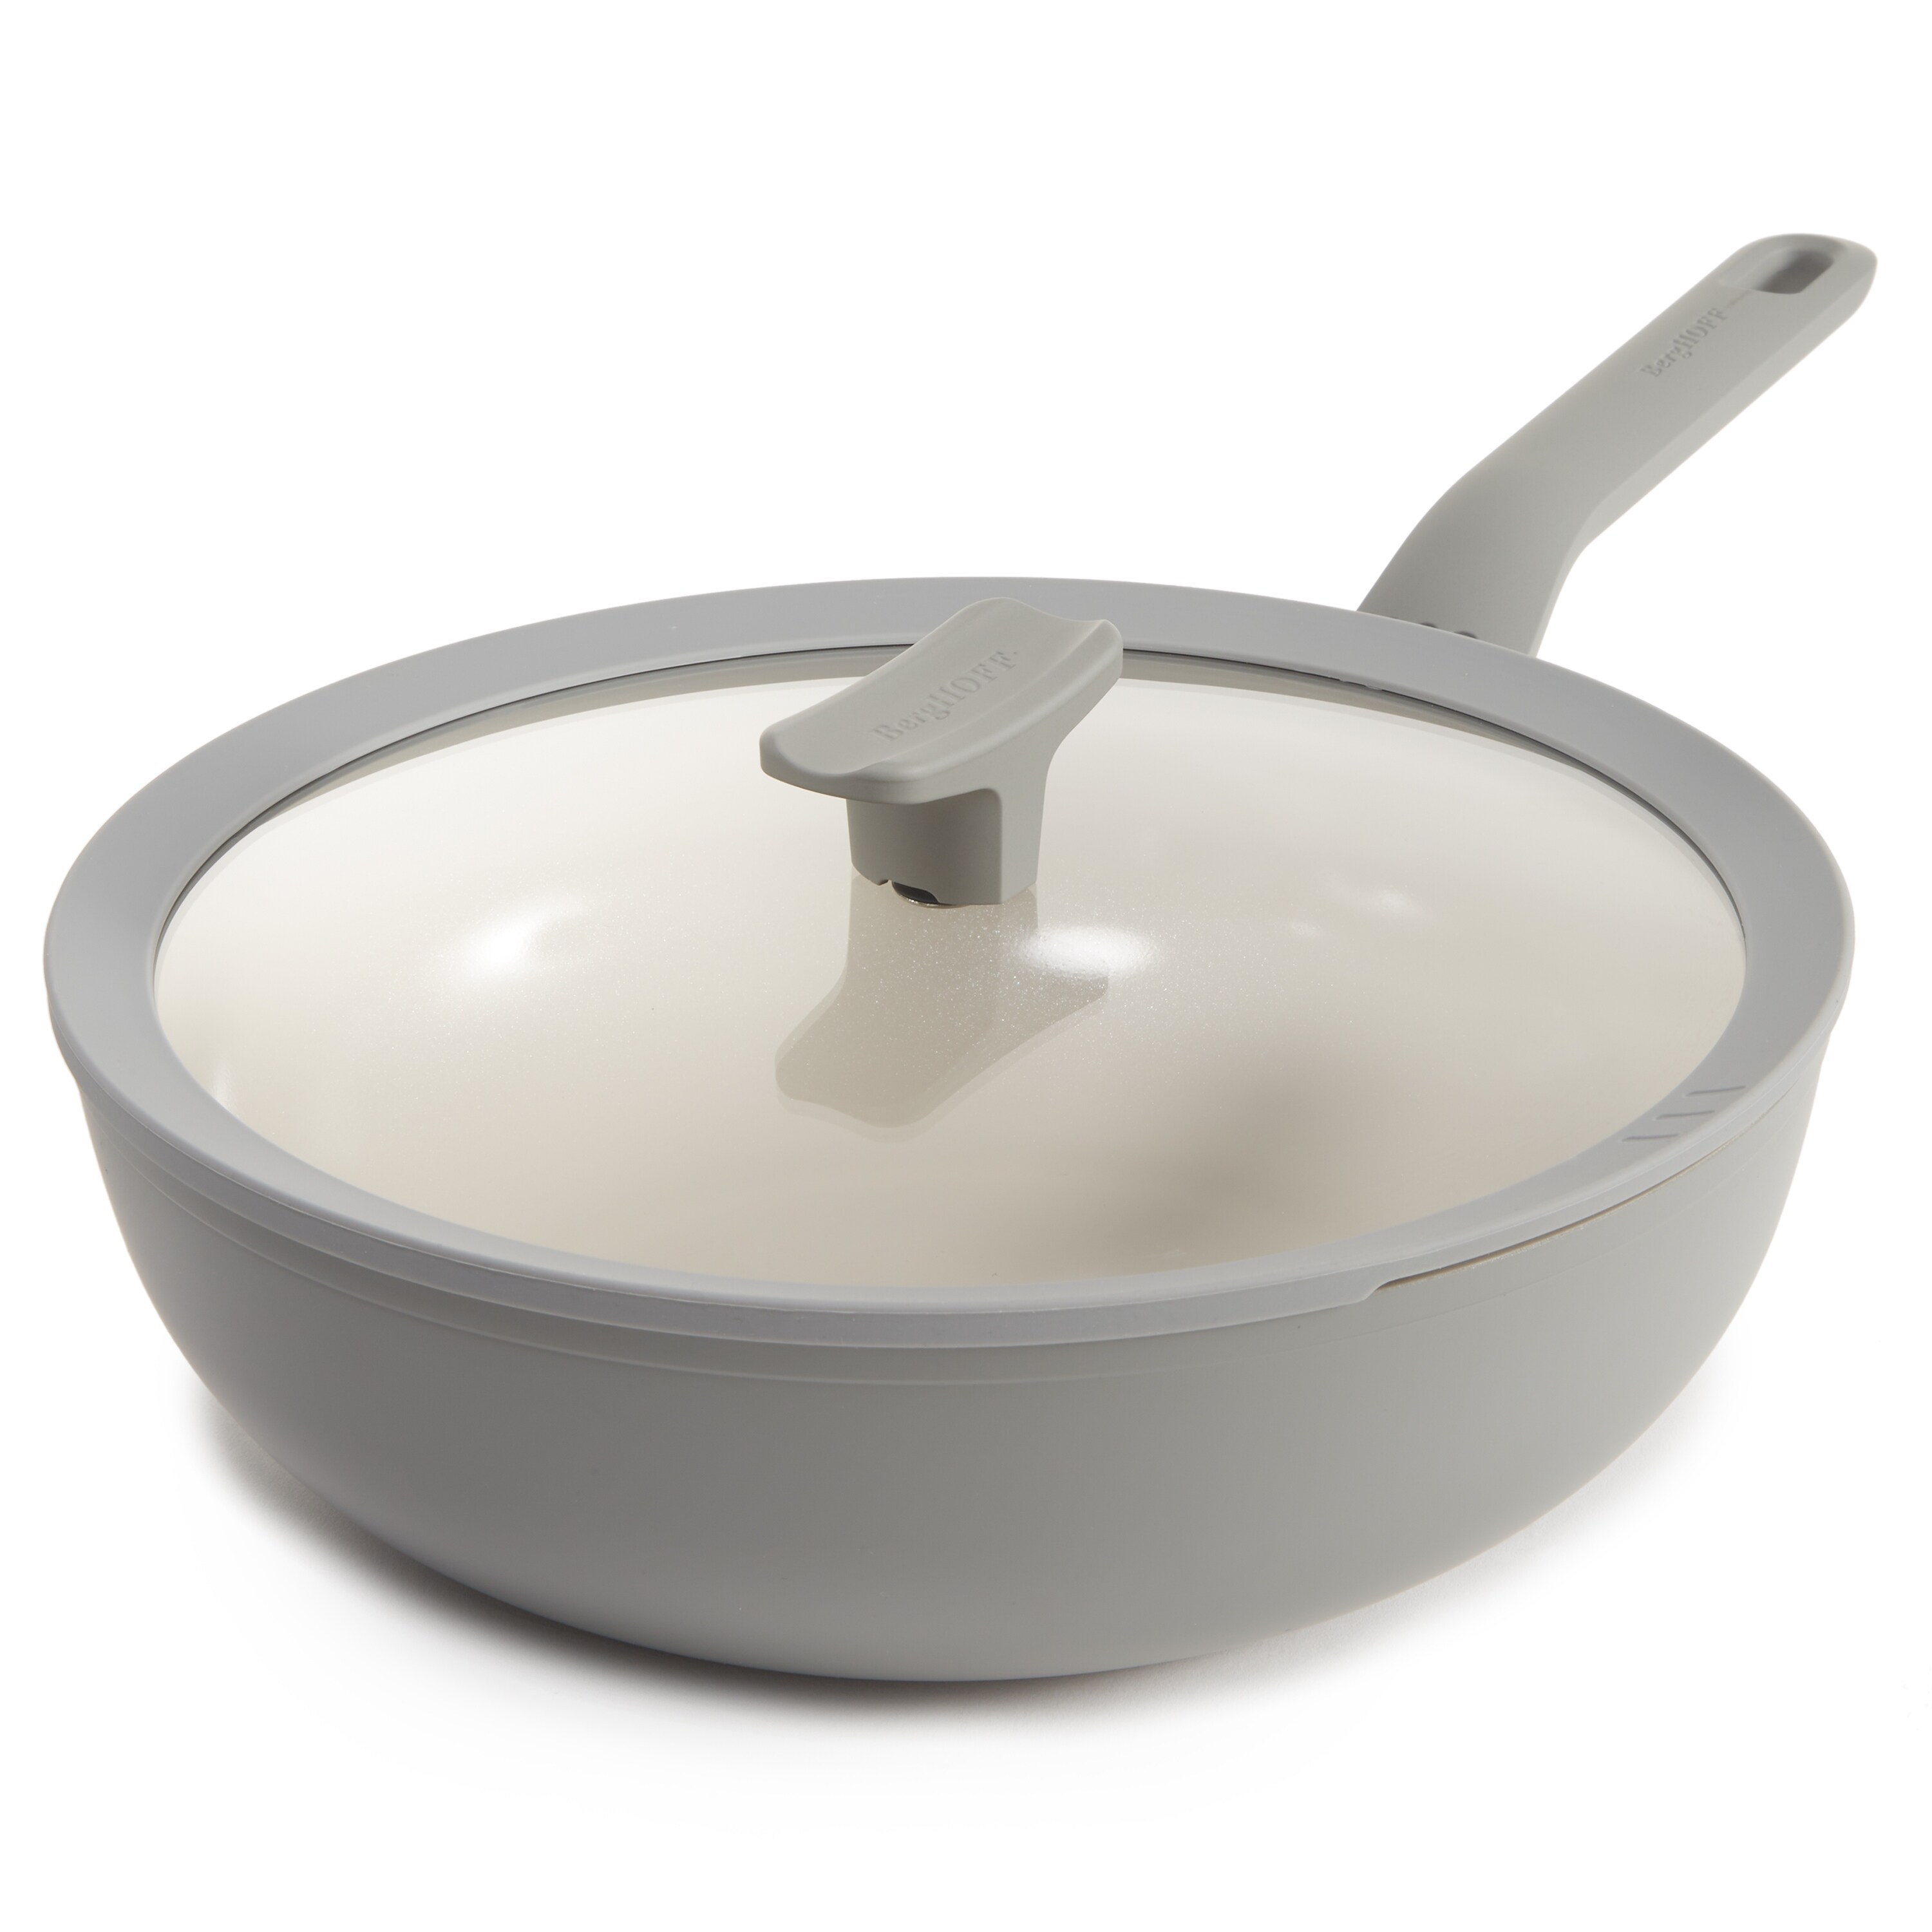 https://ak1.ostkcdn.com/images/products/is/images/direct/8f516c54eb25a181df97f517208c9bce3ff72bbe/BergHOFF-Balance-Non-stick-Ceramic-Wok-Pan-11%22%2C-4.4qt.-With-Glass-Lid%2C-Recycled-Aluminum%2C-Moonmist.jpg